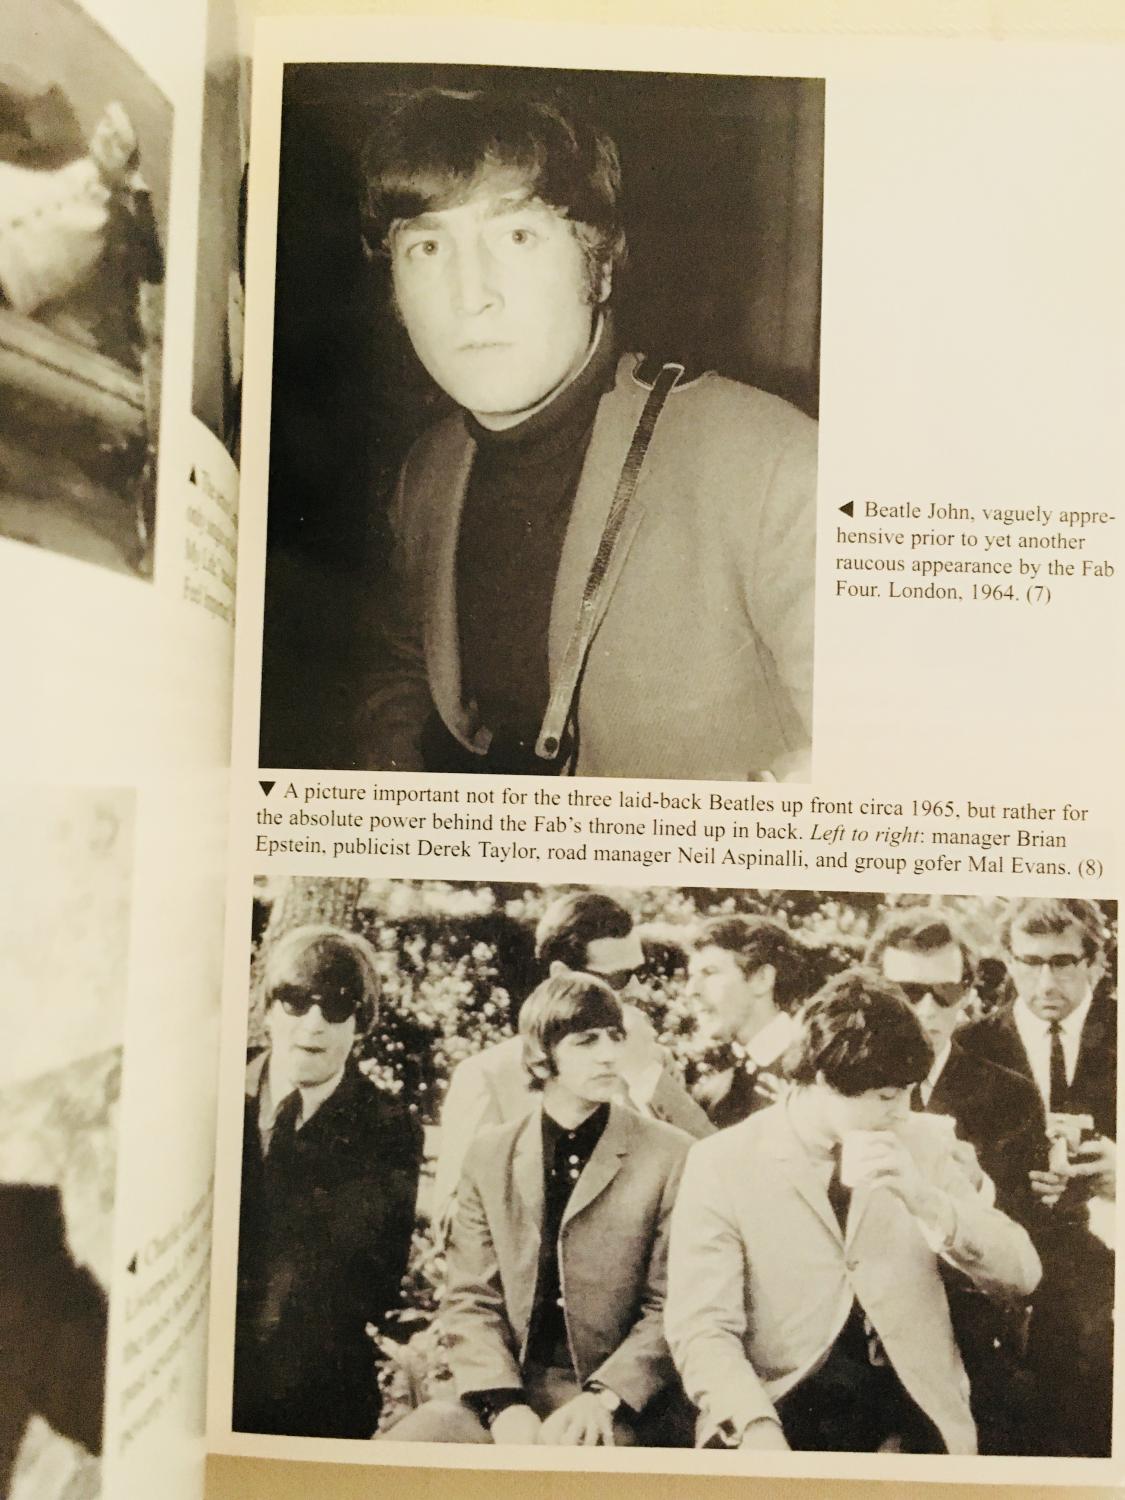 Lennon In America: Based in Part on the Lost Lennon Diaries 1971 - 1980 ...